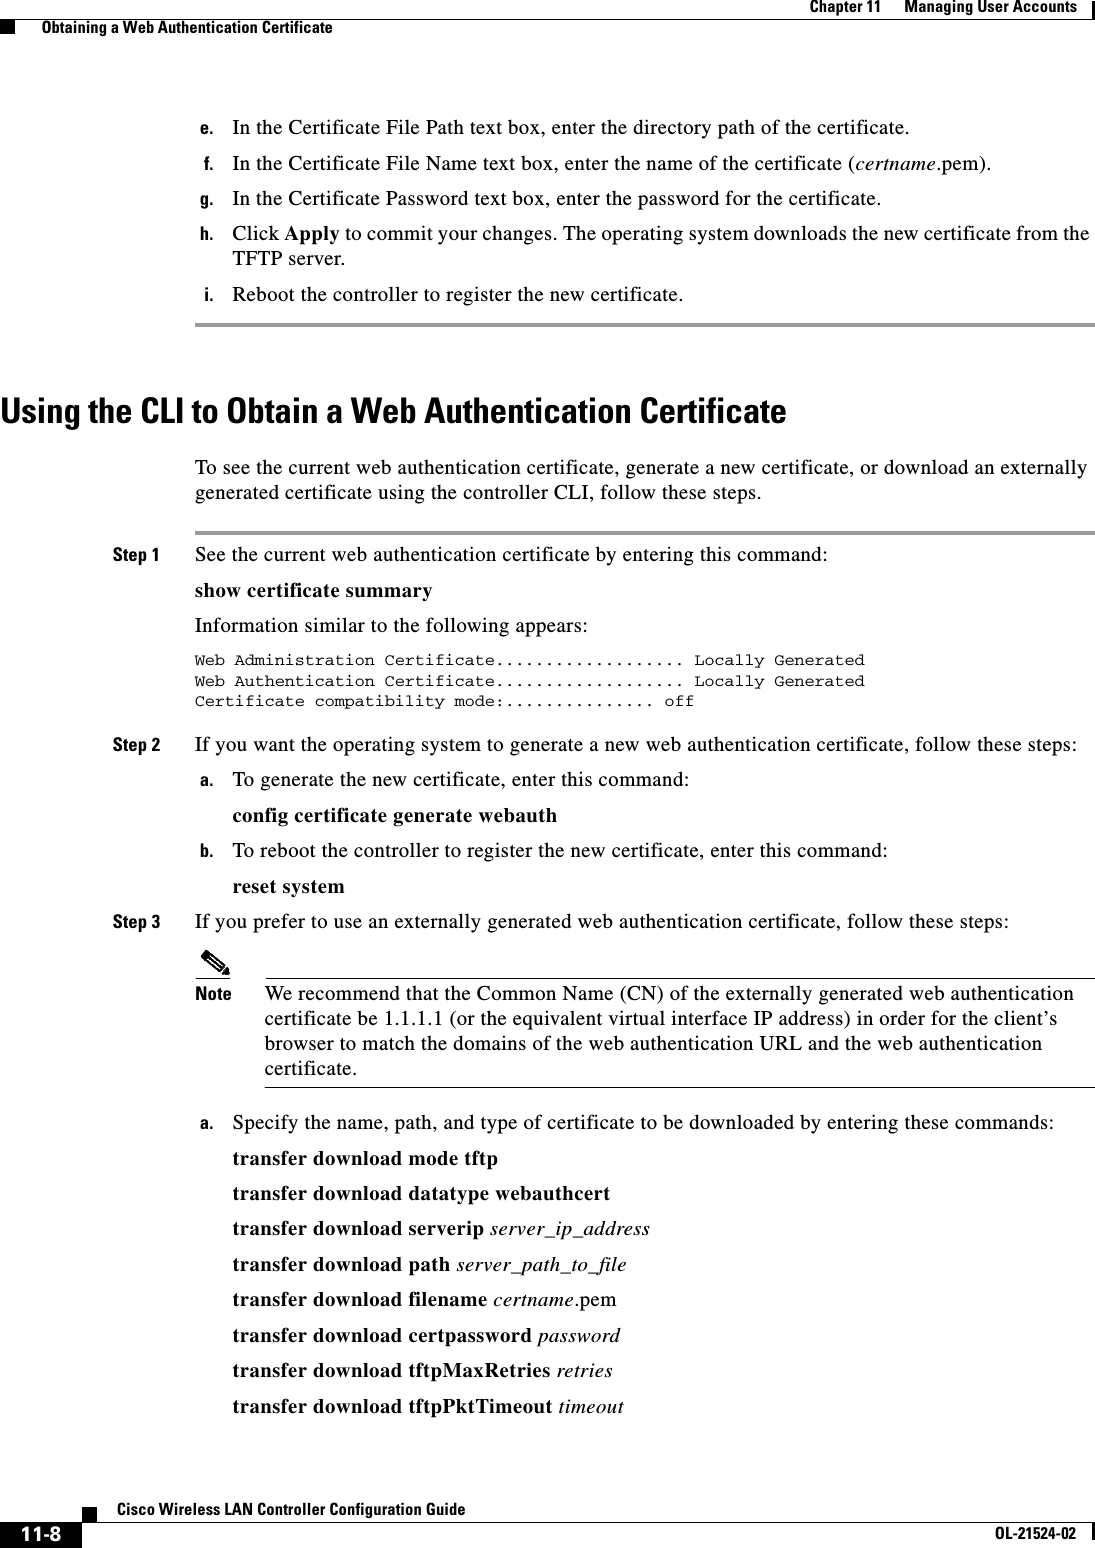  11-8Cisco Wireless LAN Controller Configuration GuideOL-21524-02Chapter 11      Managing User Accounts  Obtaining a Web Authentication Certificatee. In the Certificate File Path text box, enter the directory path of the certificate.f. In the Certificate File Name text box, enter the name of the certificate (certname.pem).g. In the Certificate Password text box, enter the password for the certificate.h. Click Apply to commit your changes. The operating system downloads the new certificate from the TFTP server.i. Reboot the controller to register the new certificate.Using the CLI to Obtain a Web Authentication CertificateTo see the current web authentication certificate, generate a new certificate, or download an externally generated certificate using the controller CLI, follow these steps.Step 1 See the current web authentication certificate by entering this command:show certificate summaryInformation similar to the following appears:Web Administration Certificate................... Locally GeneratedWeb Authentication Certificate................... Locally GeneratedCertificate compatibility mode:............... off Step 2 If you want the operating system to generate a new web authentication certificate, follow these steps:a. To generate the new certificate, enter this command:config certificate generate webauthb. To reboot the controller to register the new certificate, enter this command:reset systemStep 3 If you prefer to use an externally generated web authentication certificate, follow these steps:Note We recommend that the Common Name (CN) of the externally generated web authentication certificate be 1.1.1.1 (or the equivalent virtual interface IP address) in order for the client’s browser to match the domains of the web authentication URL and the web authentication certificate.a. Specify the name, path, and type of certificate to be downloaded by entering these commands:transfer download mode tftptransfer download datatype webauthcerttransfer download serverip server_ip_addresstransfer download path server_path_to_filetransfer download filename certname.pemtransfer download certpassword passwordtransfer download tftpMaxRetries retriestransfer download tftpPktTimeout timeout